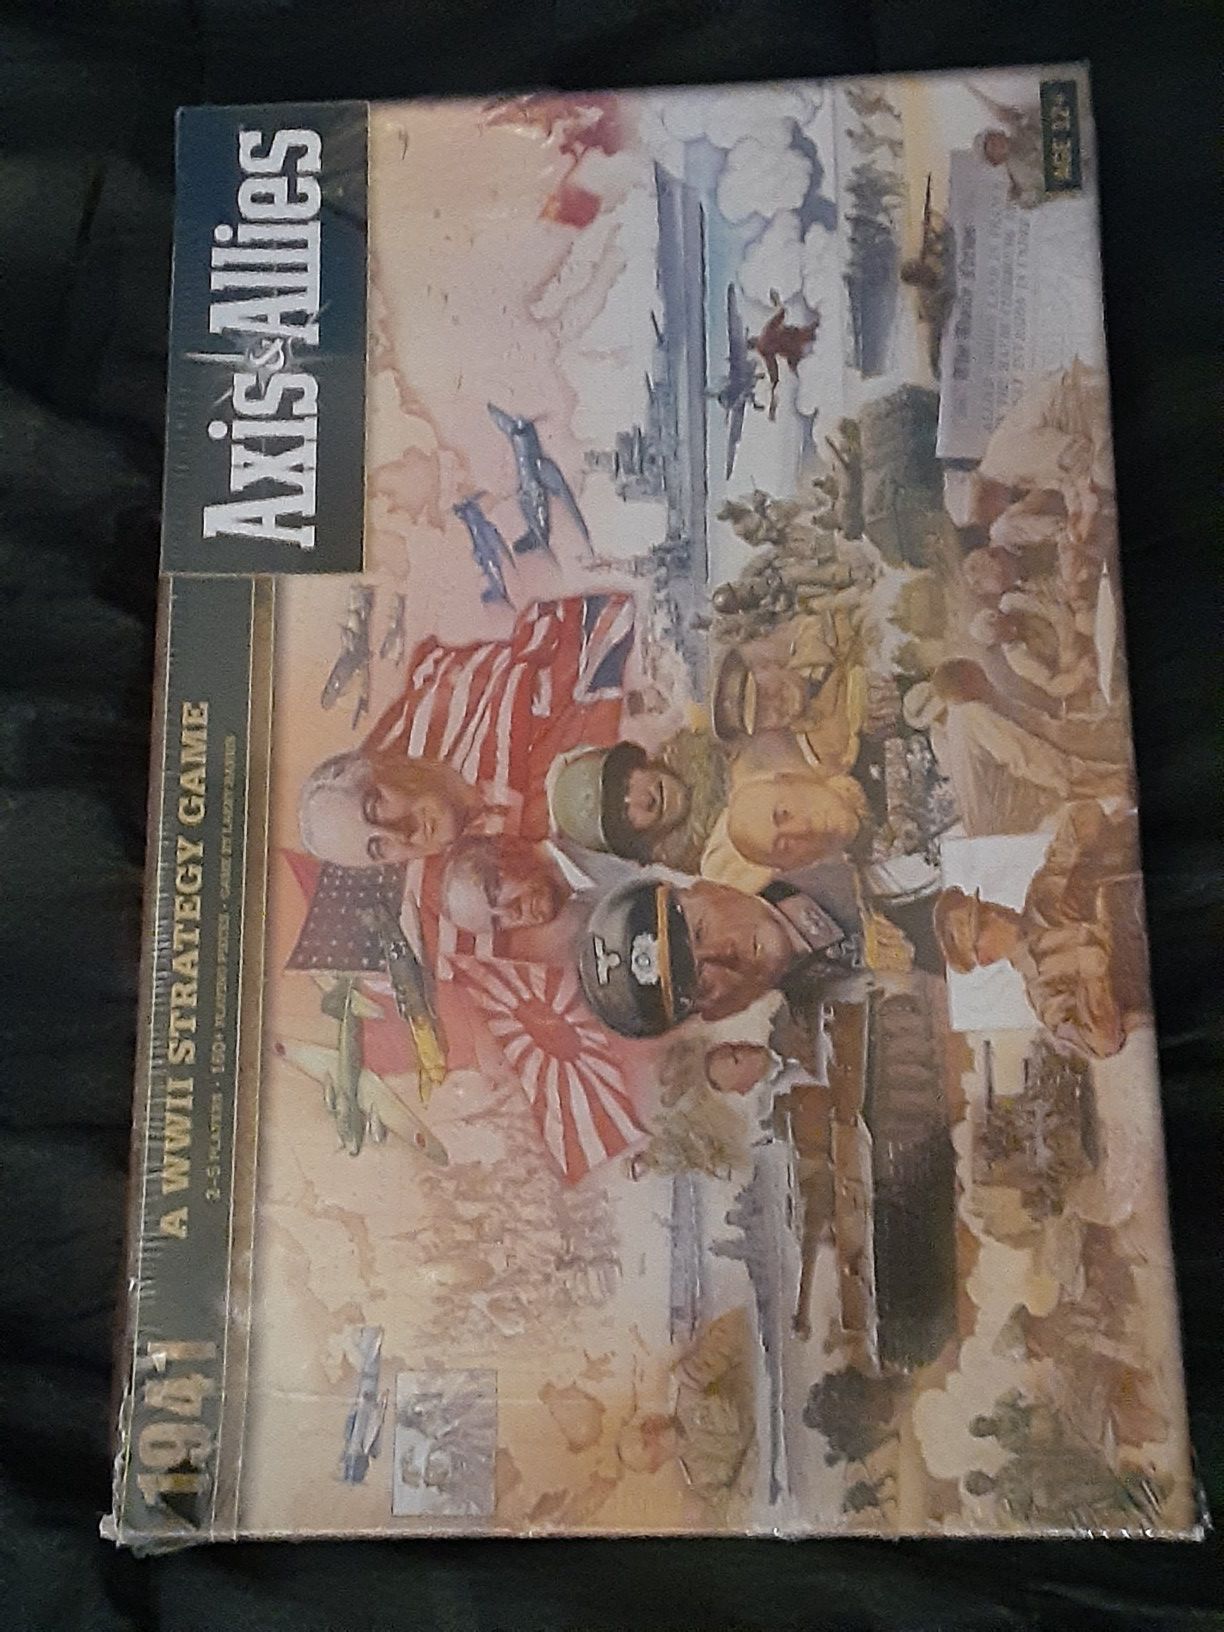 Axis & Allies Board Game. New in sealed package!